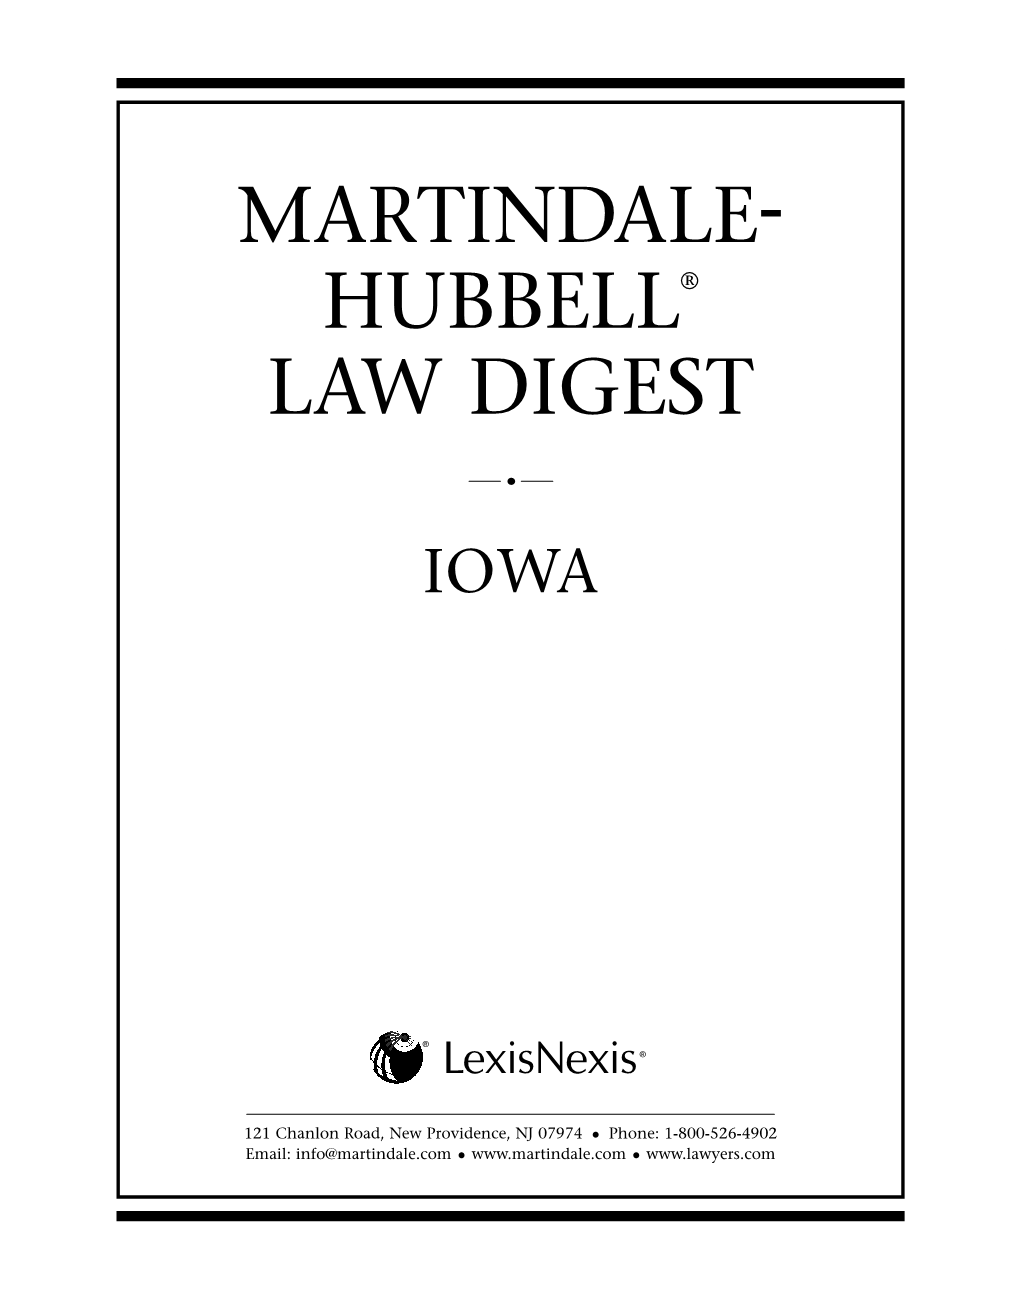 Martindale- Hubbell® Law Digest